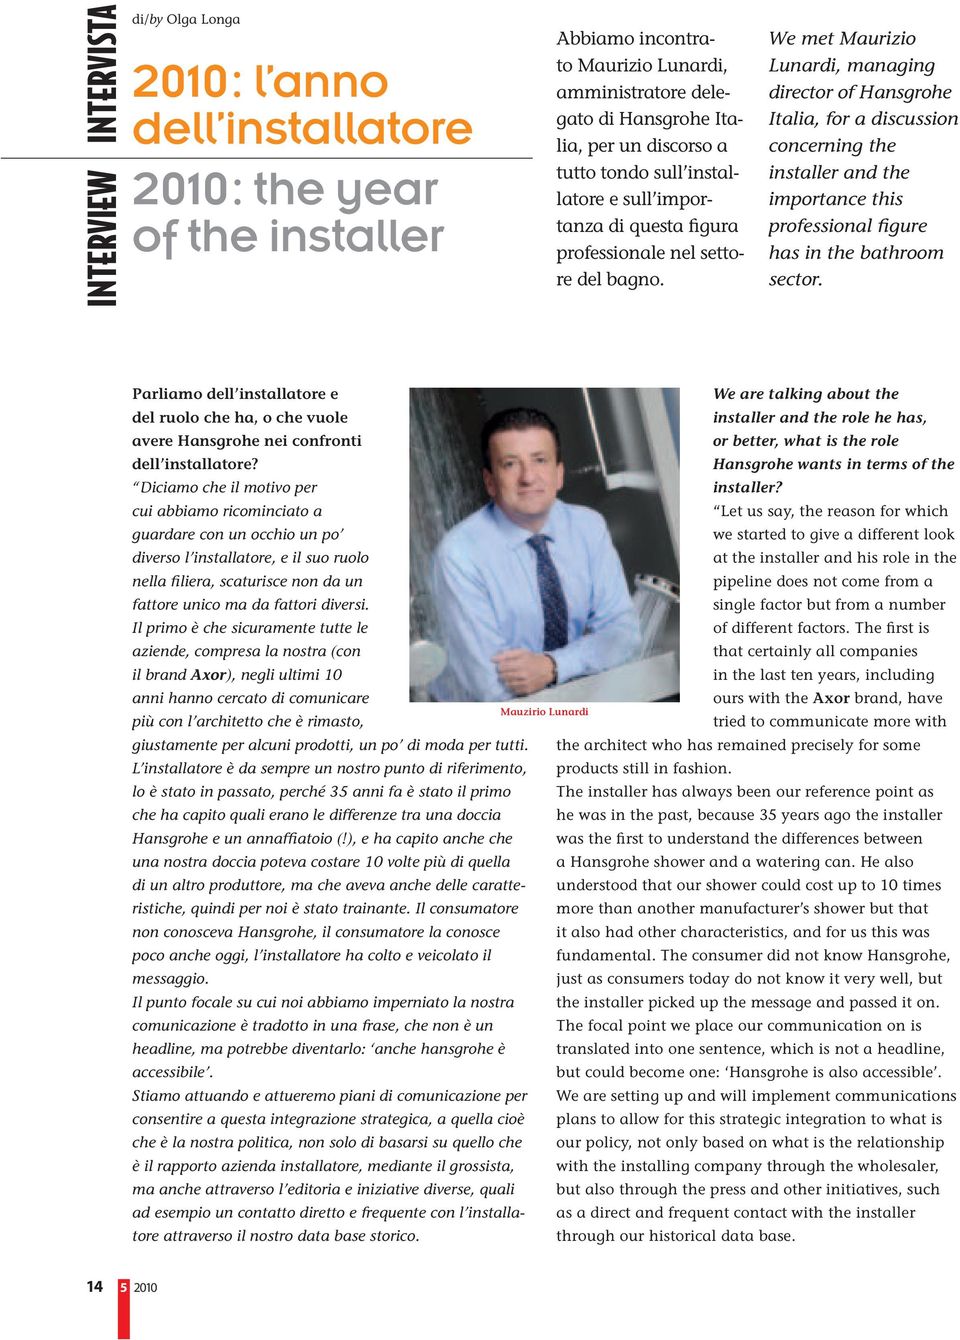 We met Maurizio Lunardi, managing director of Hansgrohe Italia, for a discussion concerning the installer and the importance this professional figure has in the bathroom sector.